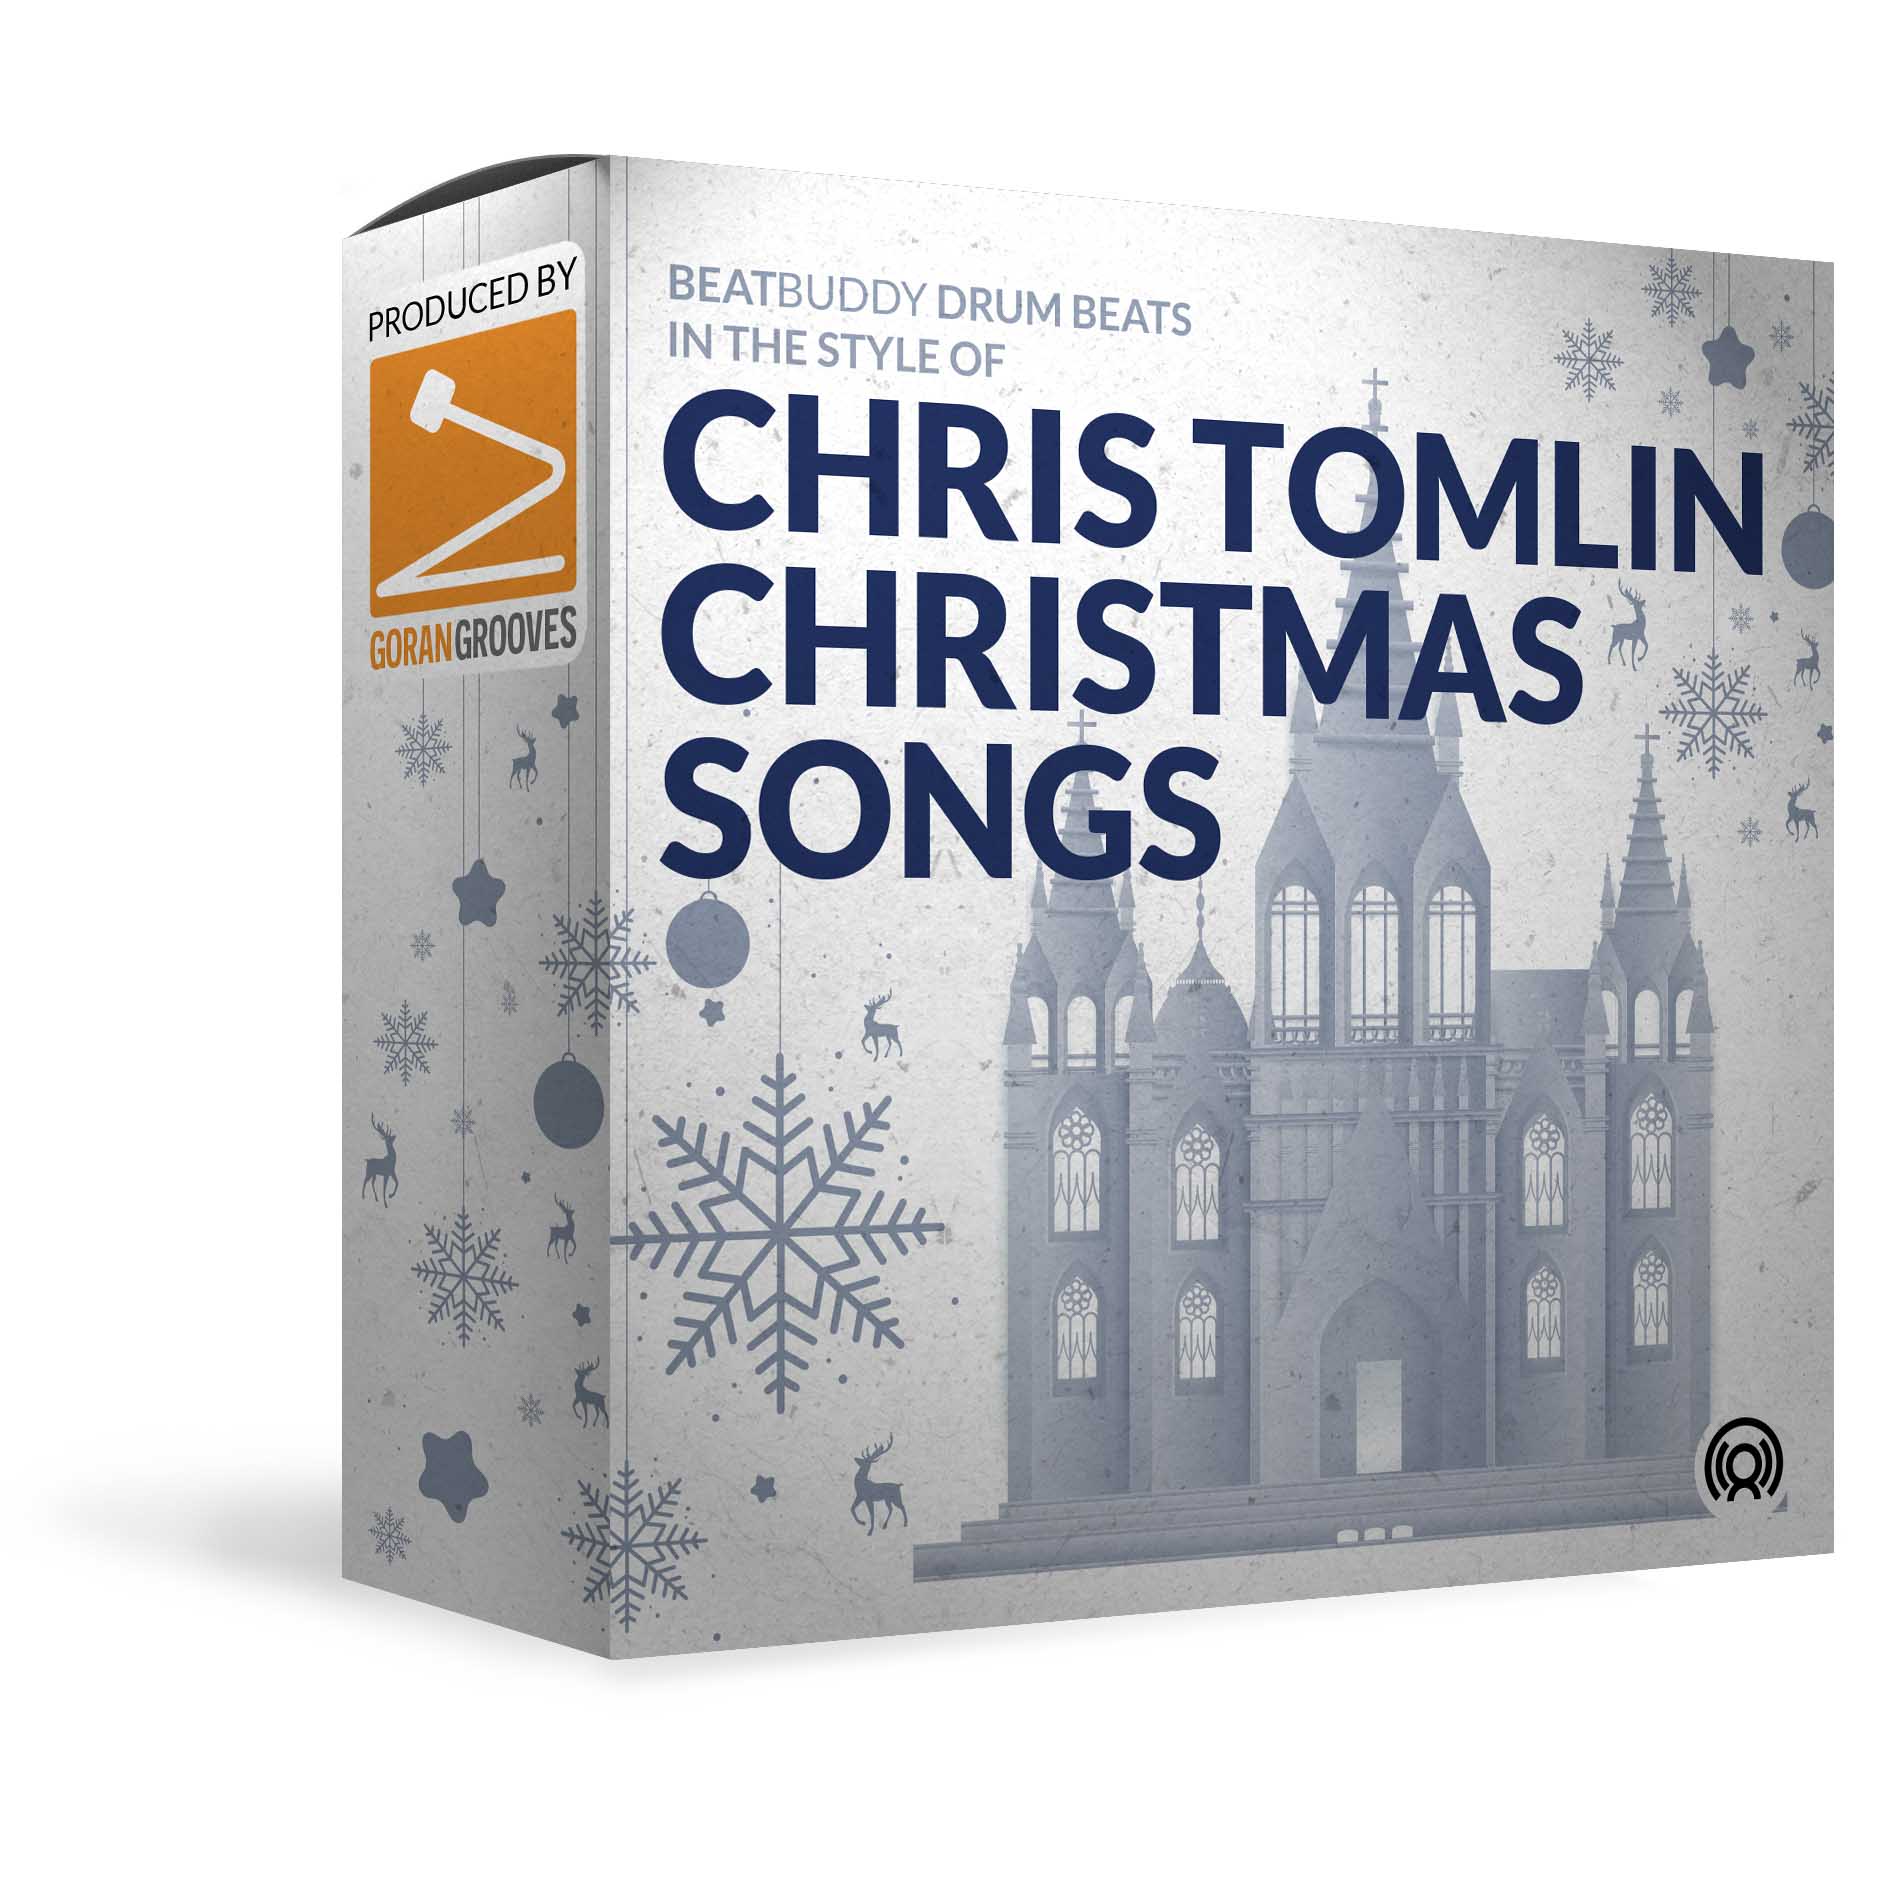 Chris Tomlin Christmas Songs- Beats In The Style Of | Premium Library for BeatBuddy